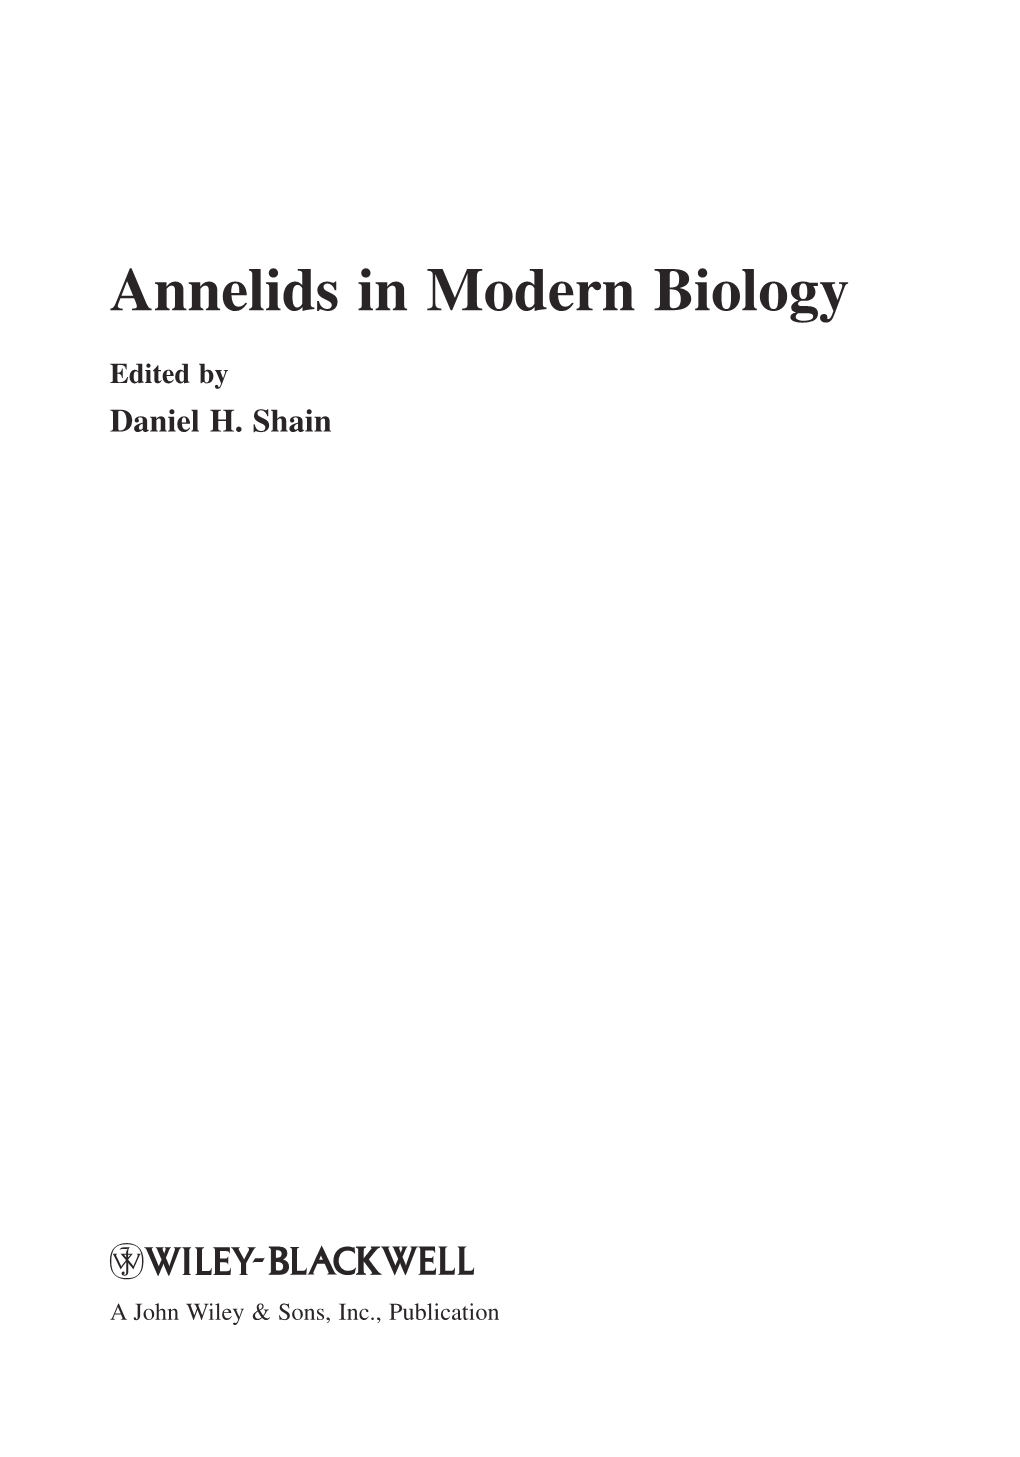 Annelid Phylogeny—Molecular Analysis with an Emphasis on Model Annelids 13 Part II Evolution and Development Christoph Bleidorn 2.1 Introduction 13 5